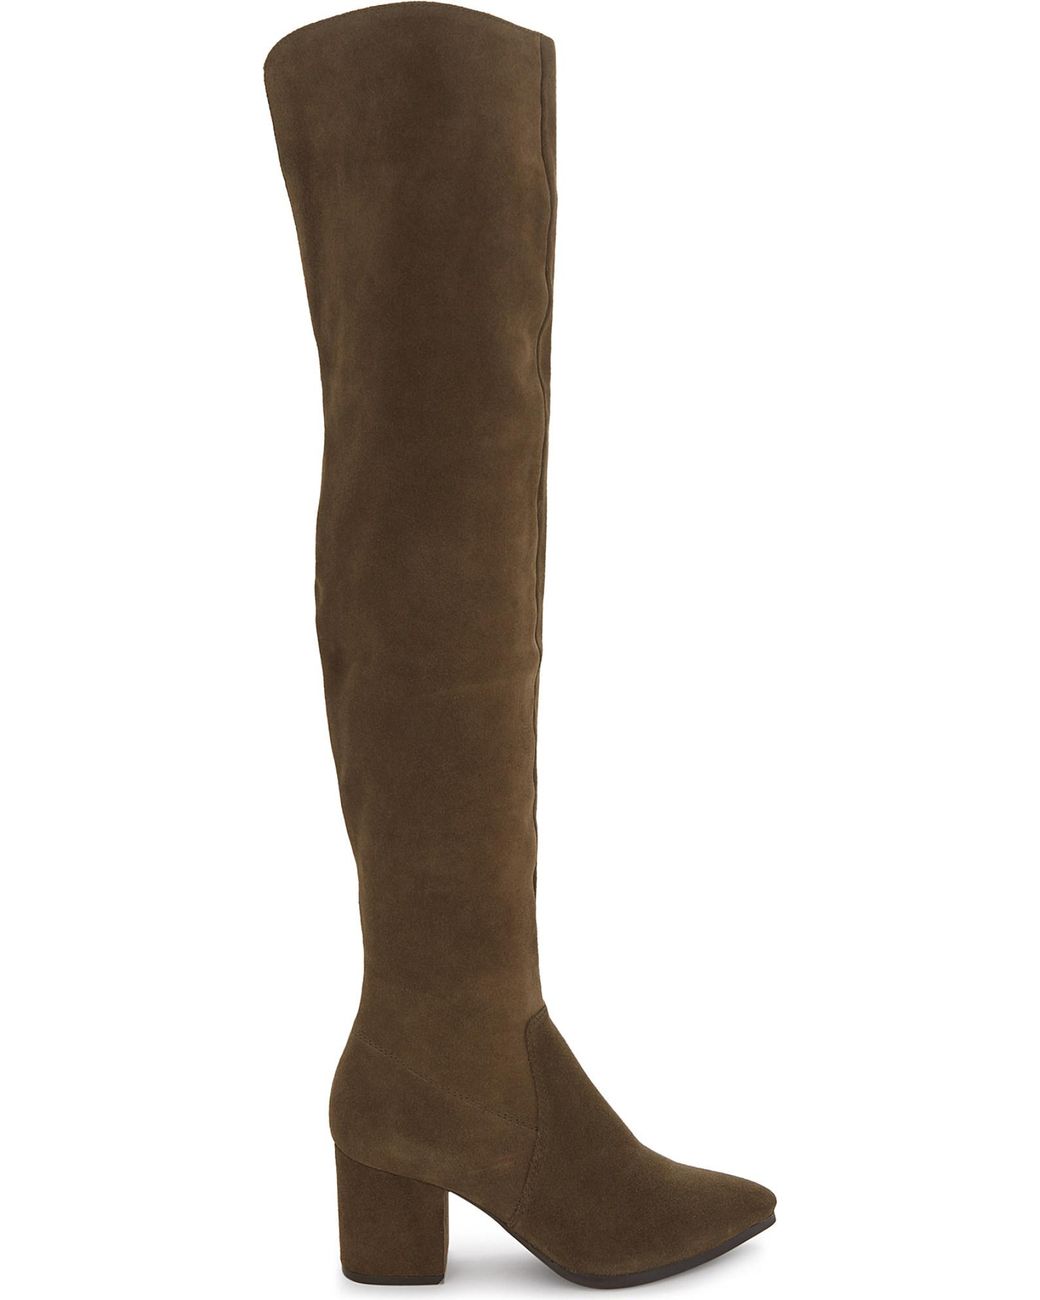 tale Ved daggry Mantle ALDO Iboewet Suede Over-the-knee Boots in Natural | Lyst